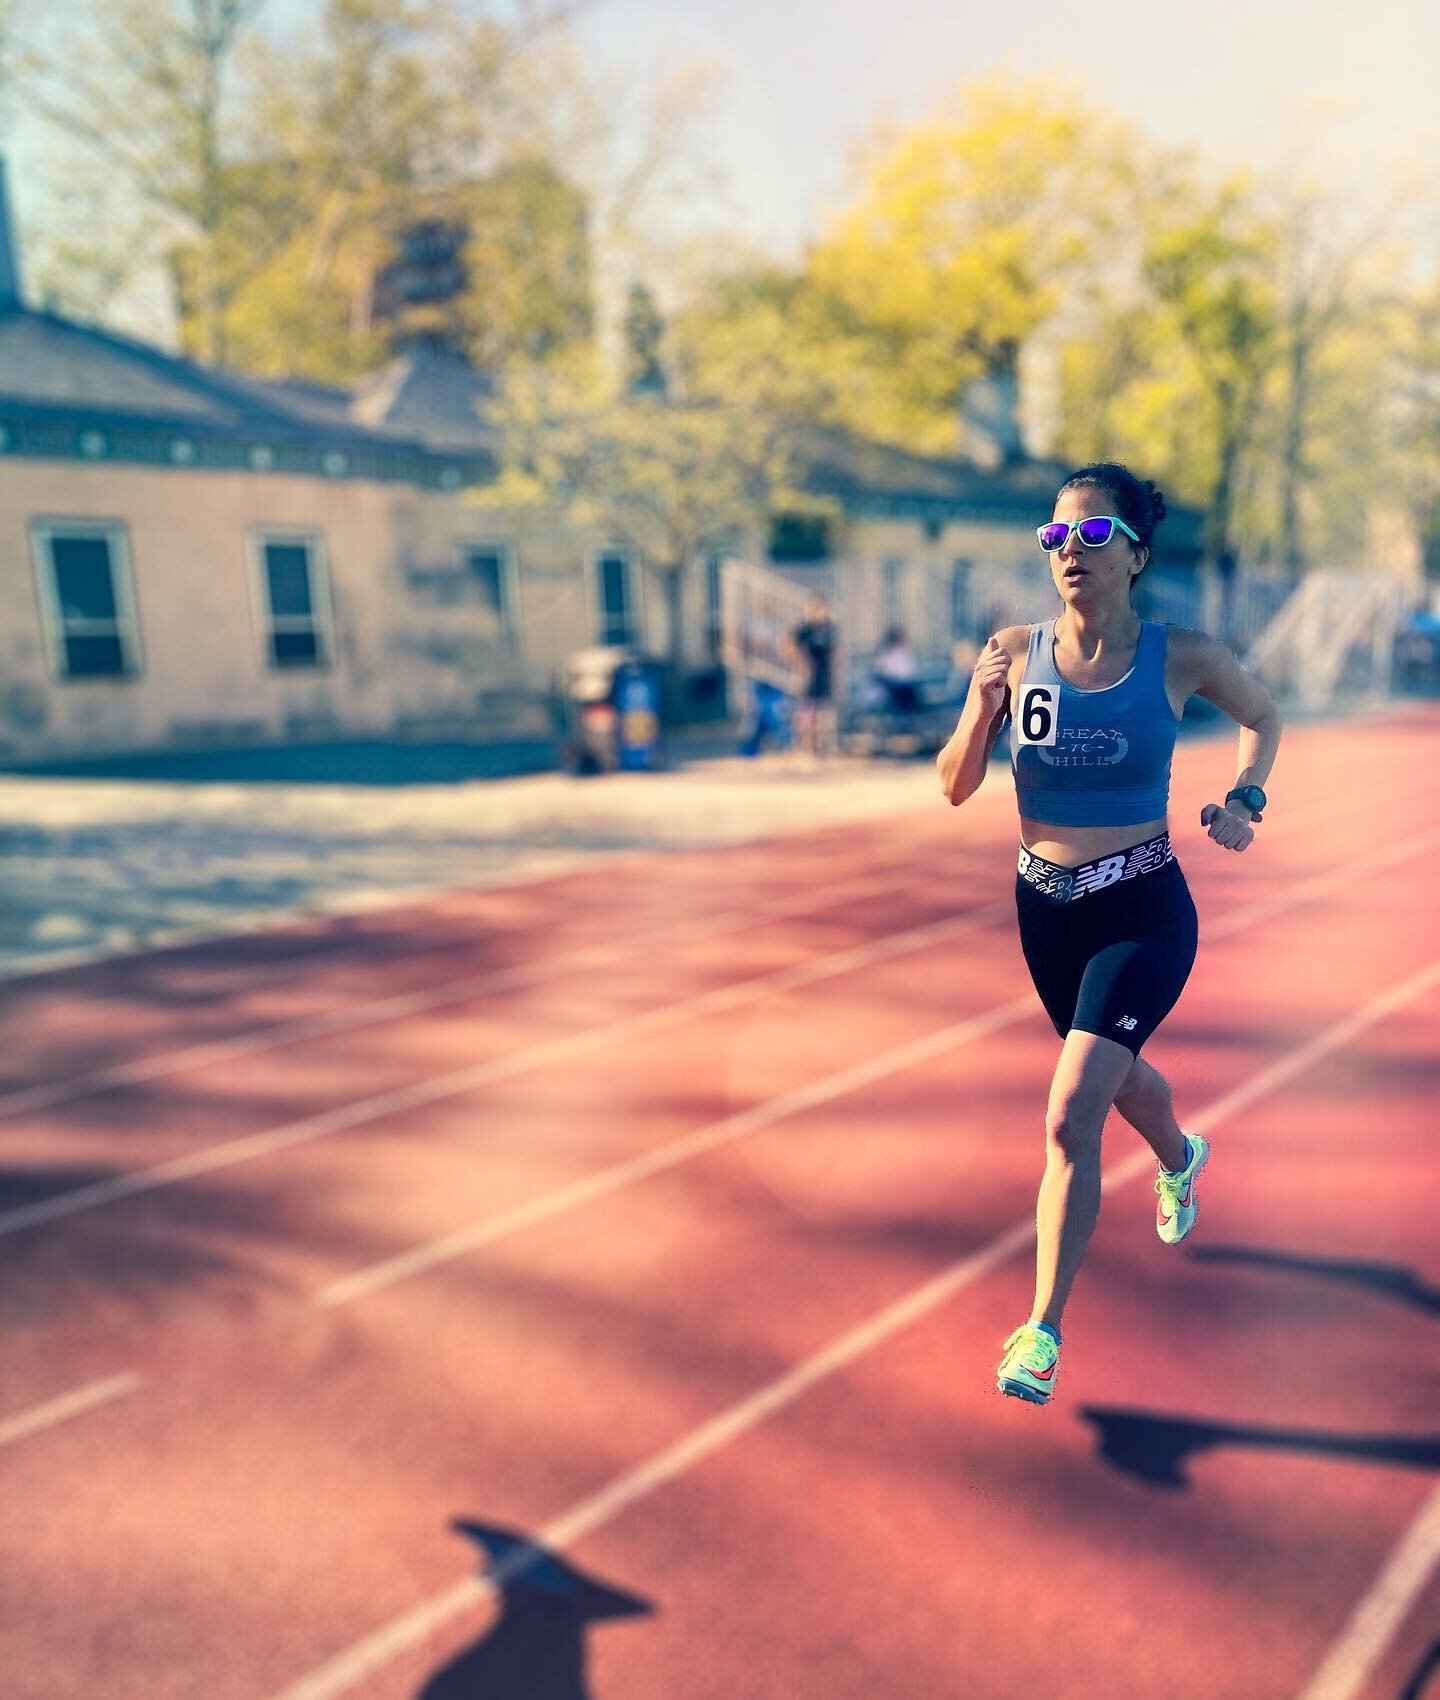 Great Hill TC takes to the track for the @eastriver5000 Club Conference. 

Congratulations on those shiny new PRs @miz616 and @yymichellechoi ! Great racing, all!! 

Thanks for the cheers and photos, @celeste.flick !!

#exhilarationofsharedachievemen